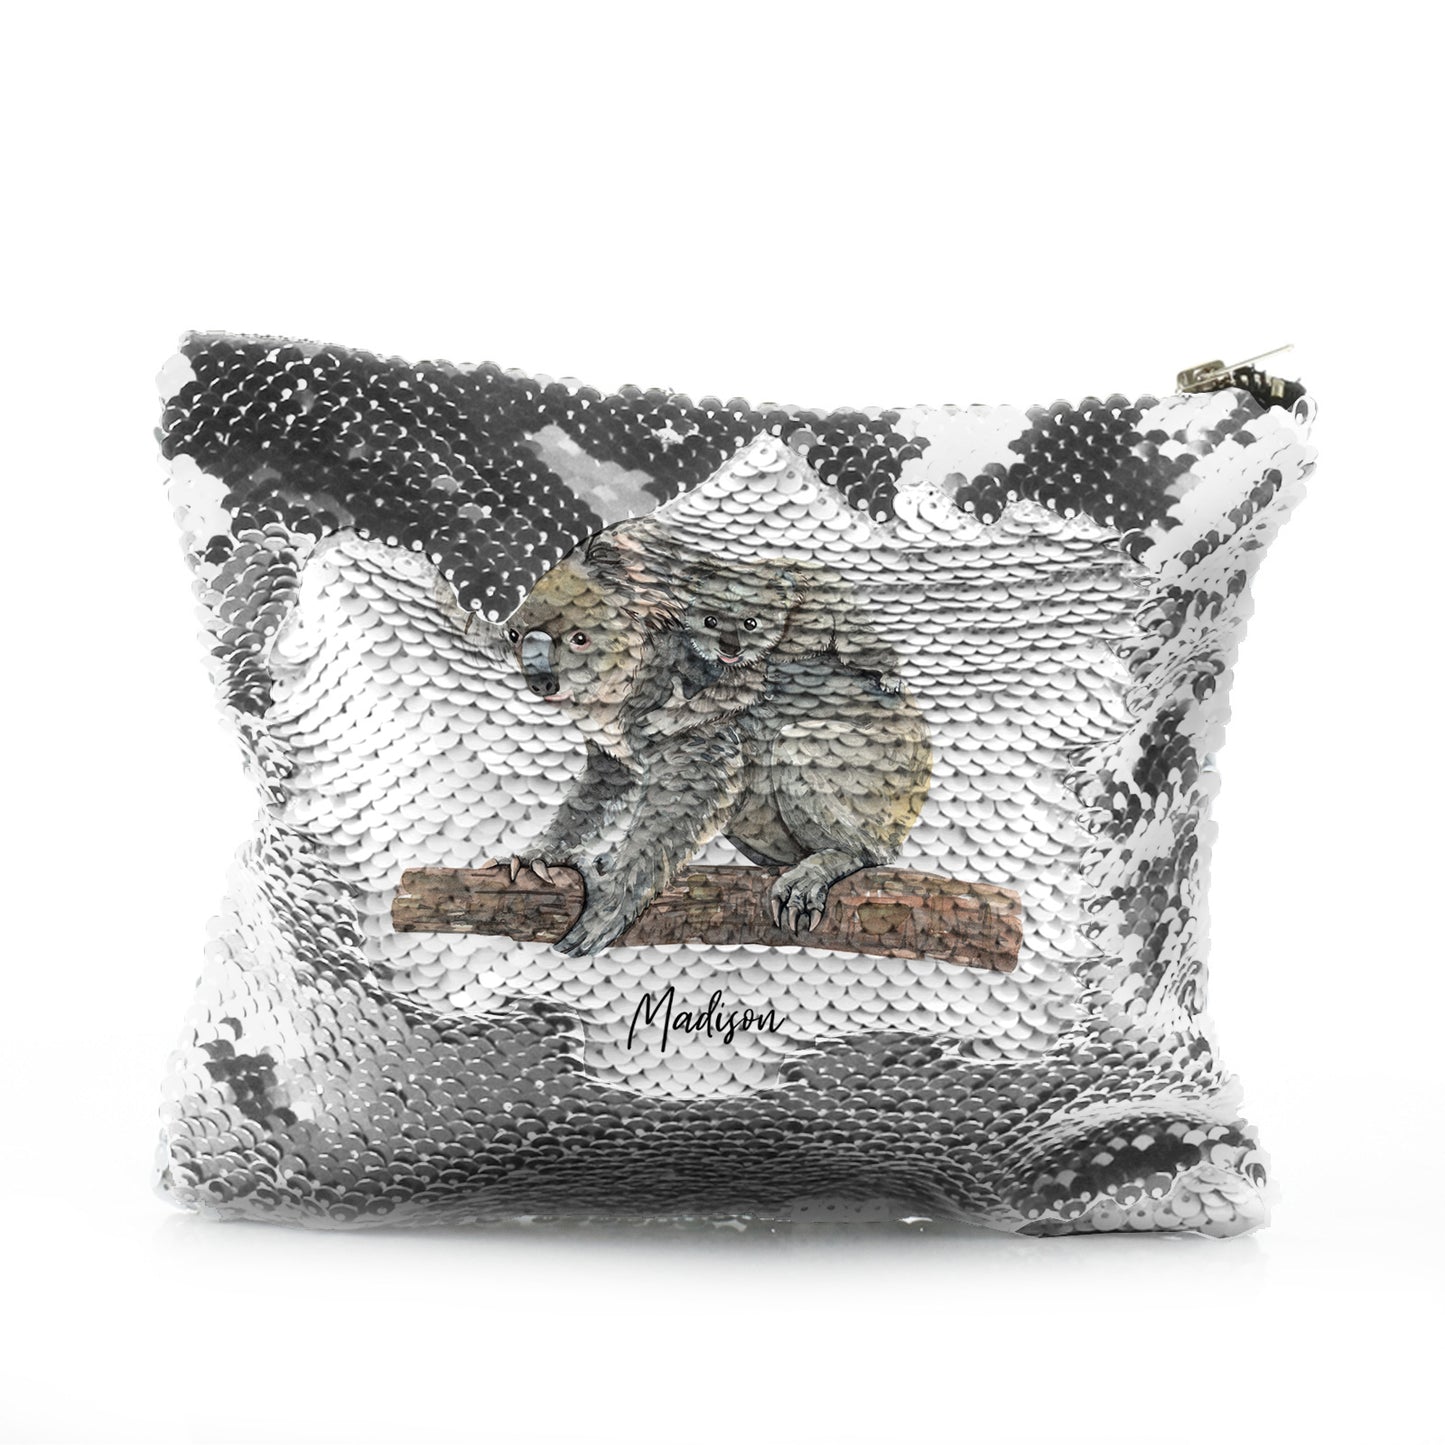 Personalised Sequin Zip Bag with Welcoming Text and Embracing Mum and Baby Koalas